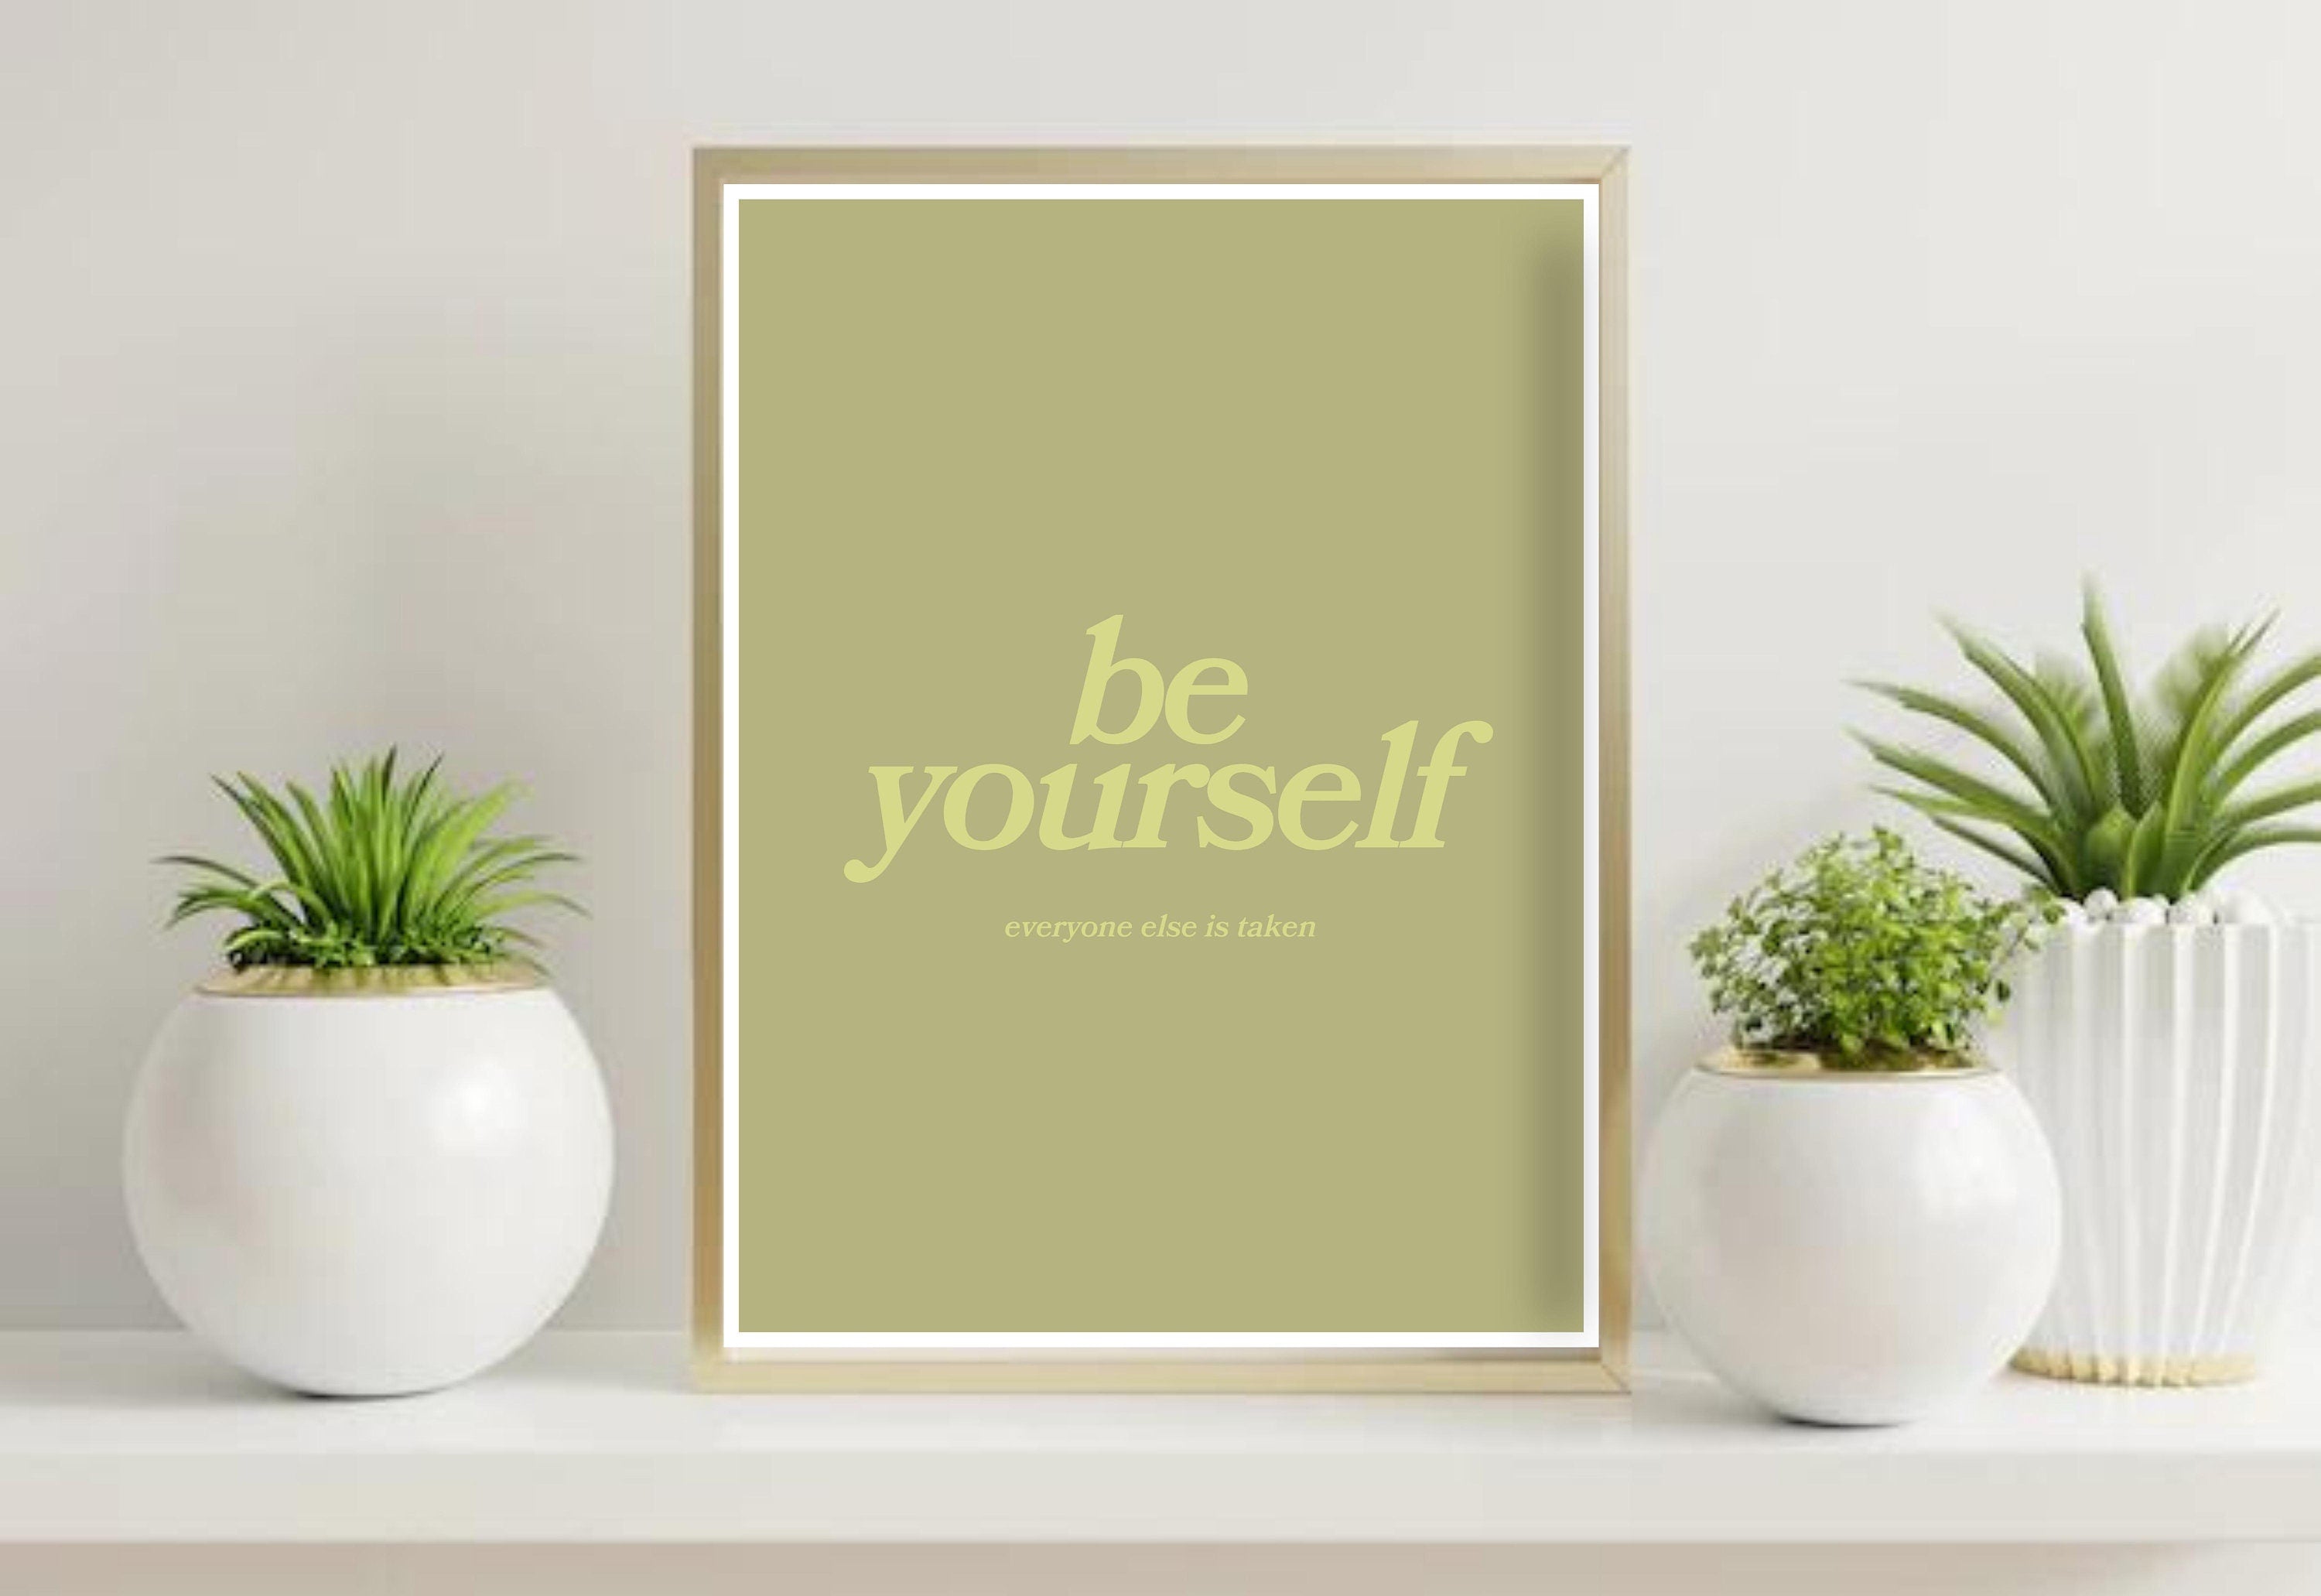 Showcase your unique style with the 'Be Yourself' Digital Art Print, an inspiring piece that encourages self-expression.